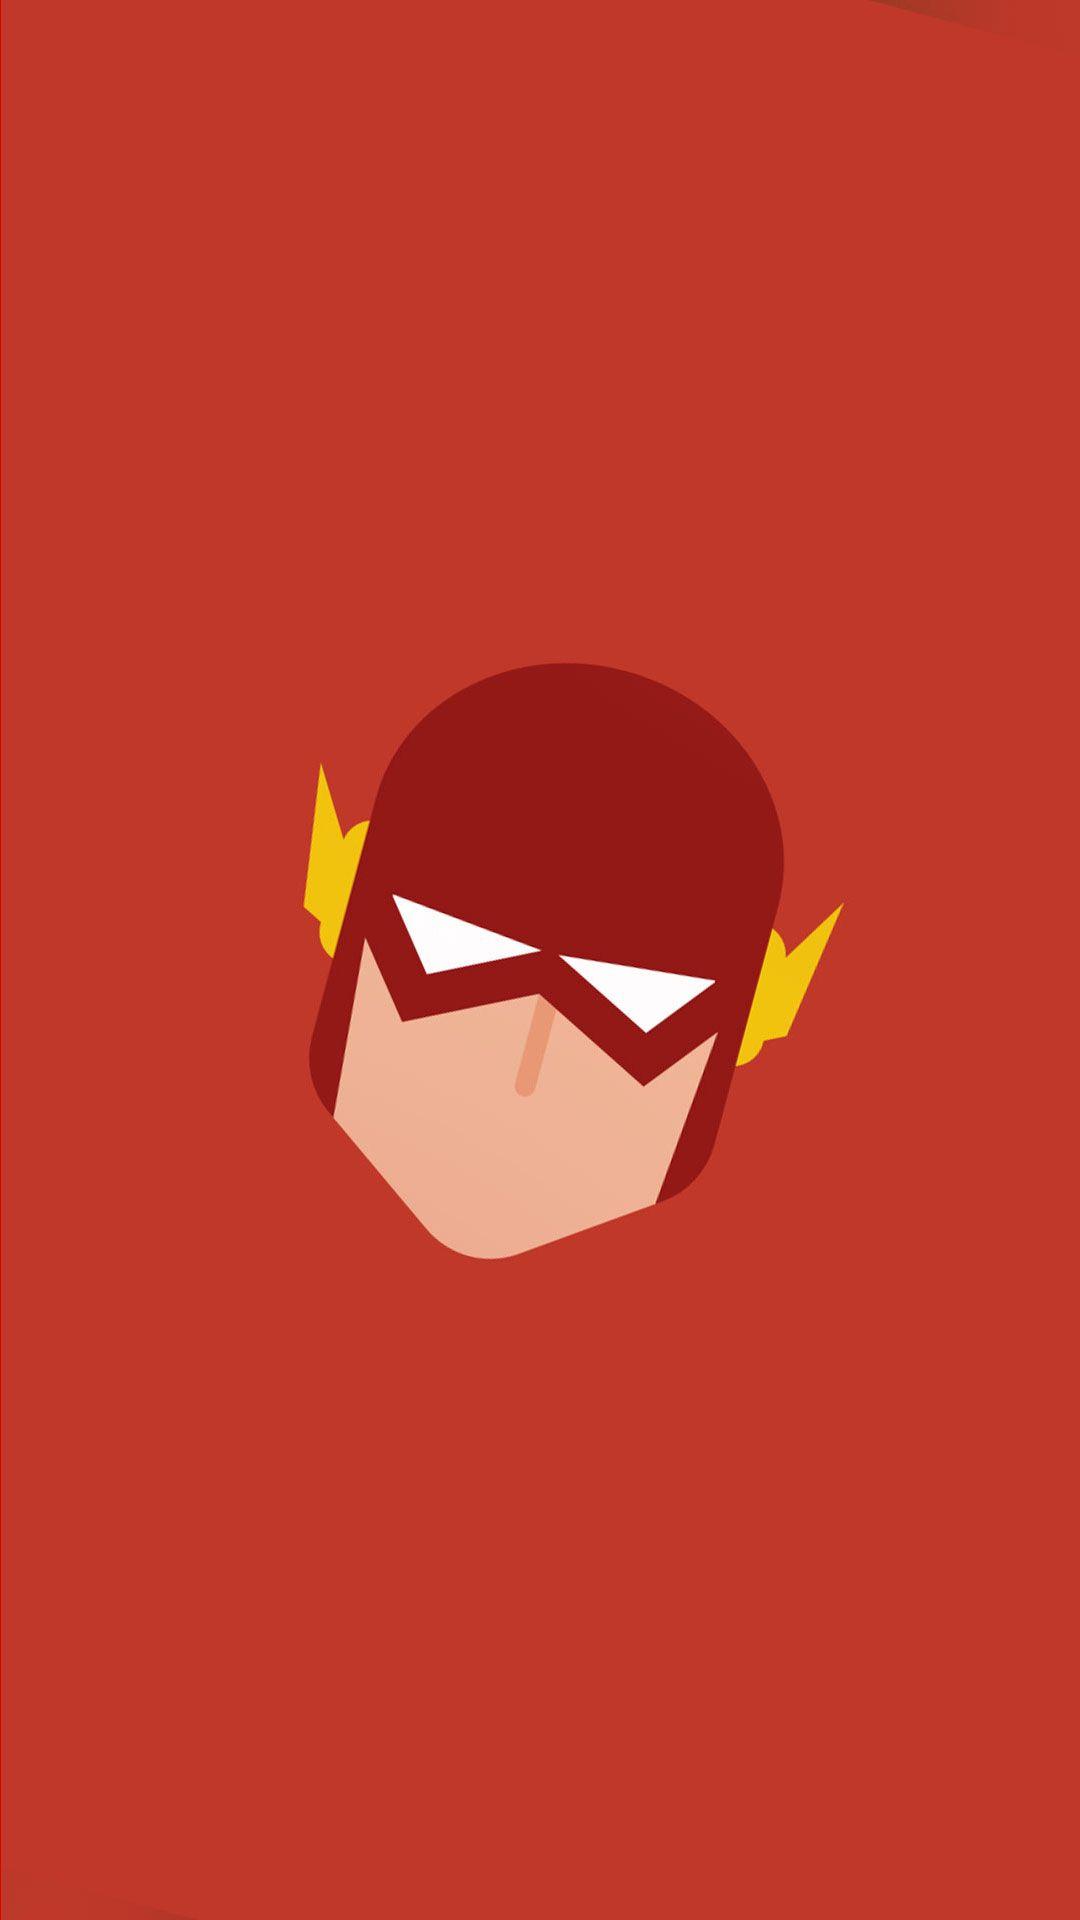 The Flash Symbol Wallpaper For Android For Android